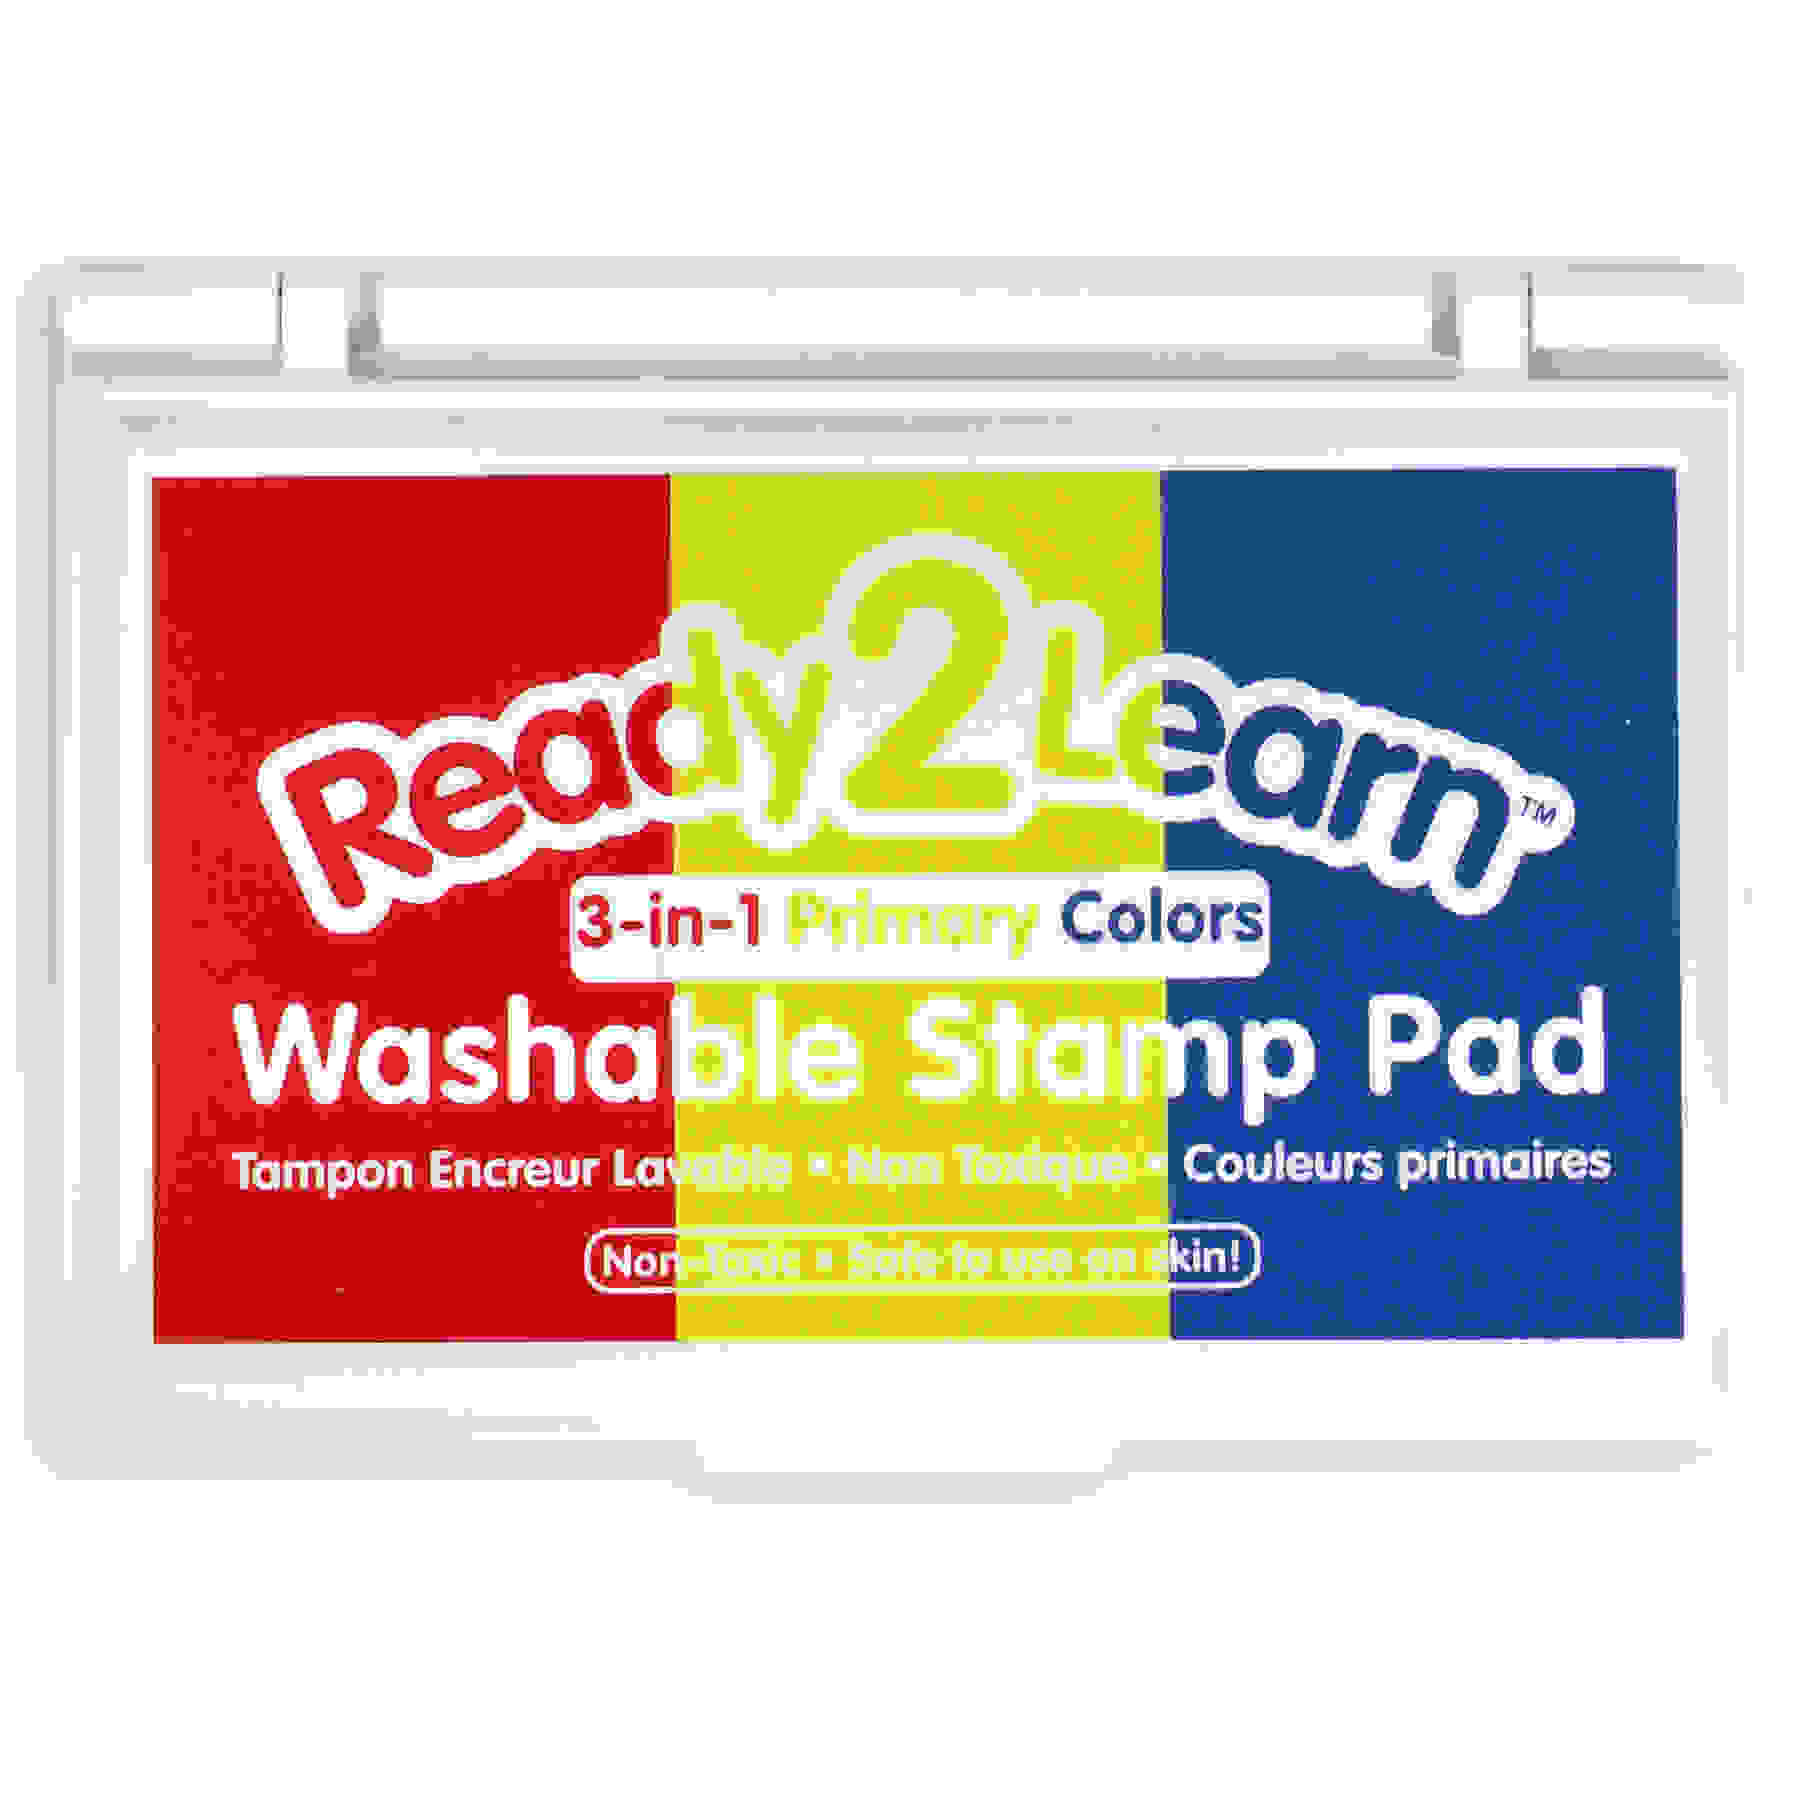 Washable Stamp Pad - 3-in-1 Primary Colors